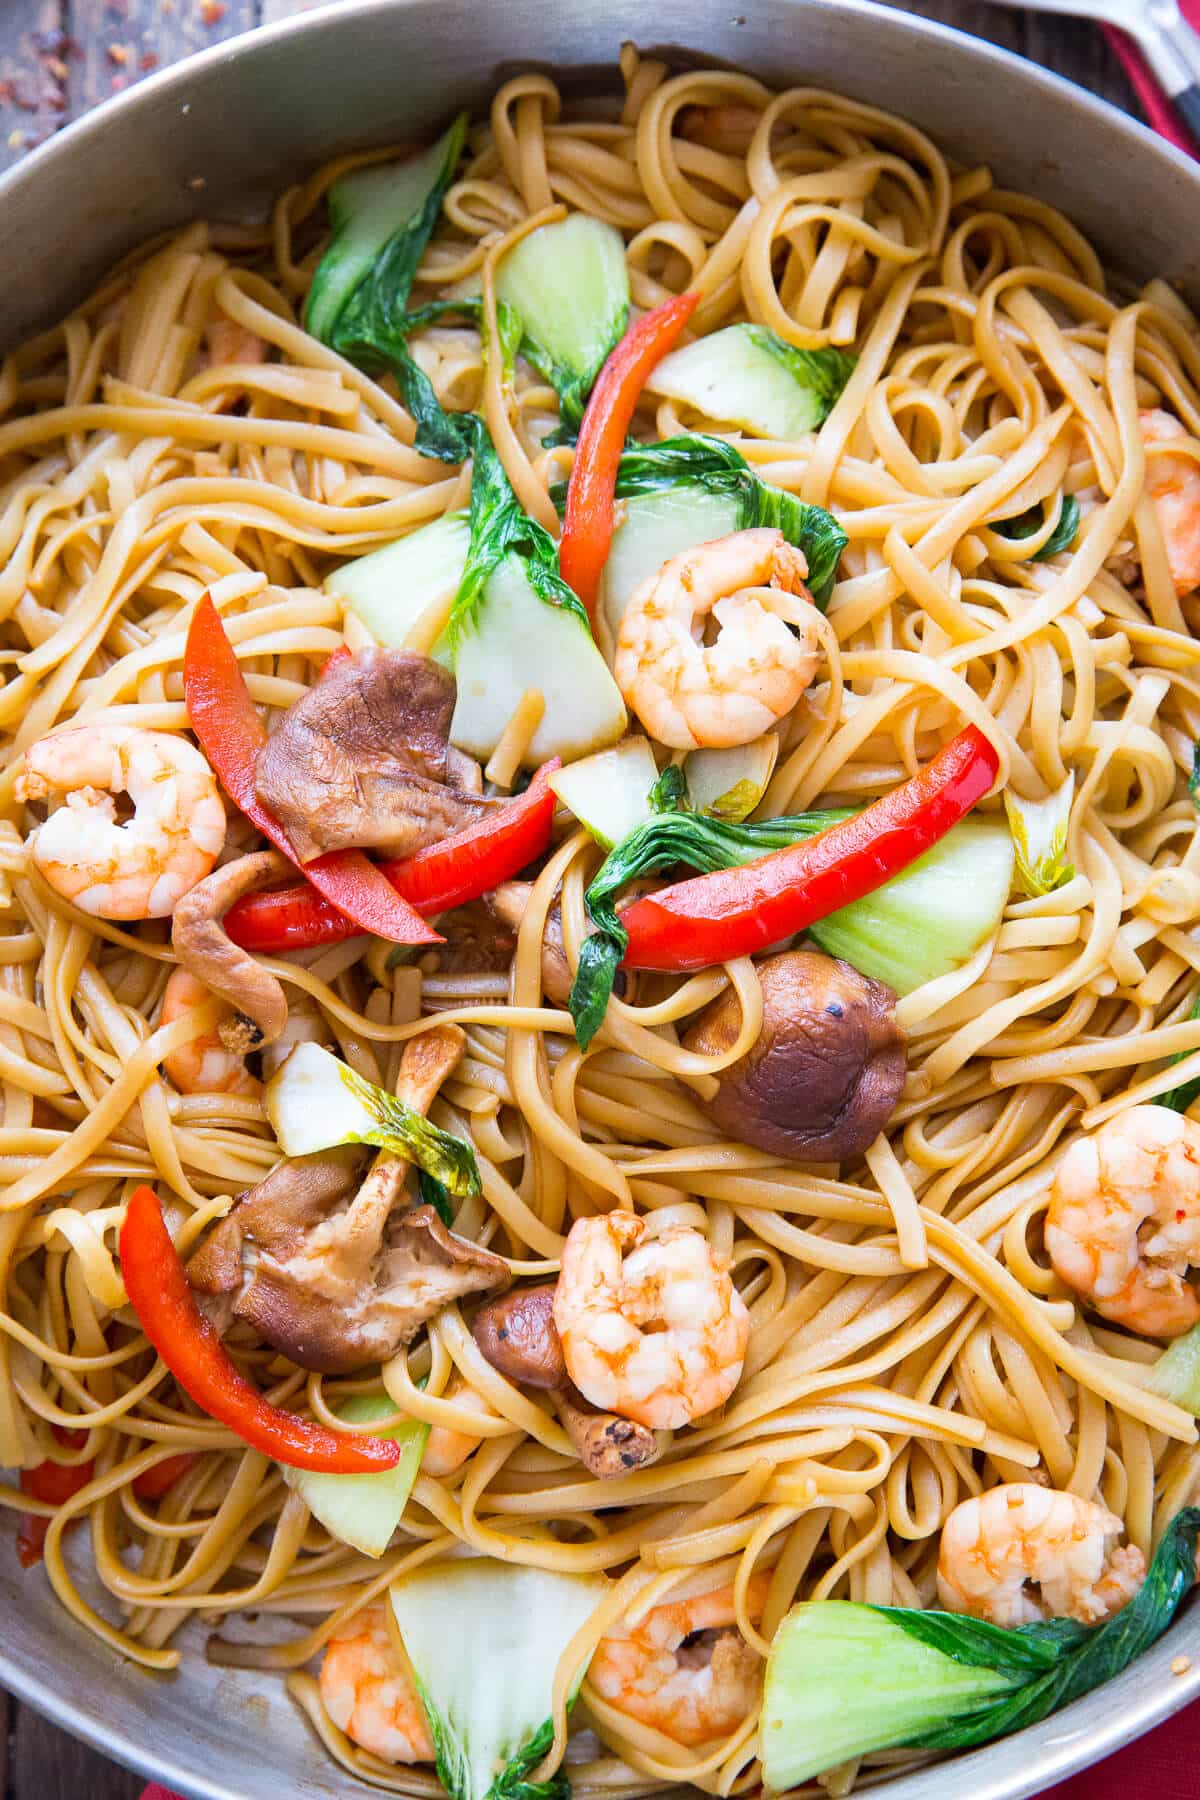 Shrimp Lo Mein is a dish that combines ease and flavor! Saucy noodles, vegetables, and shrimp make take out a thing of the past!